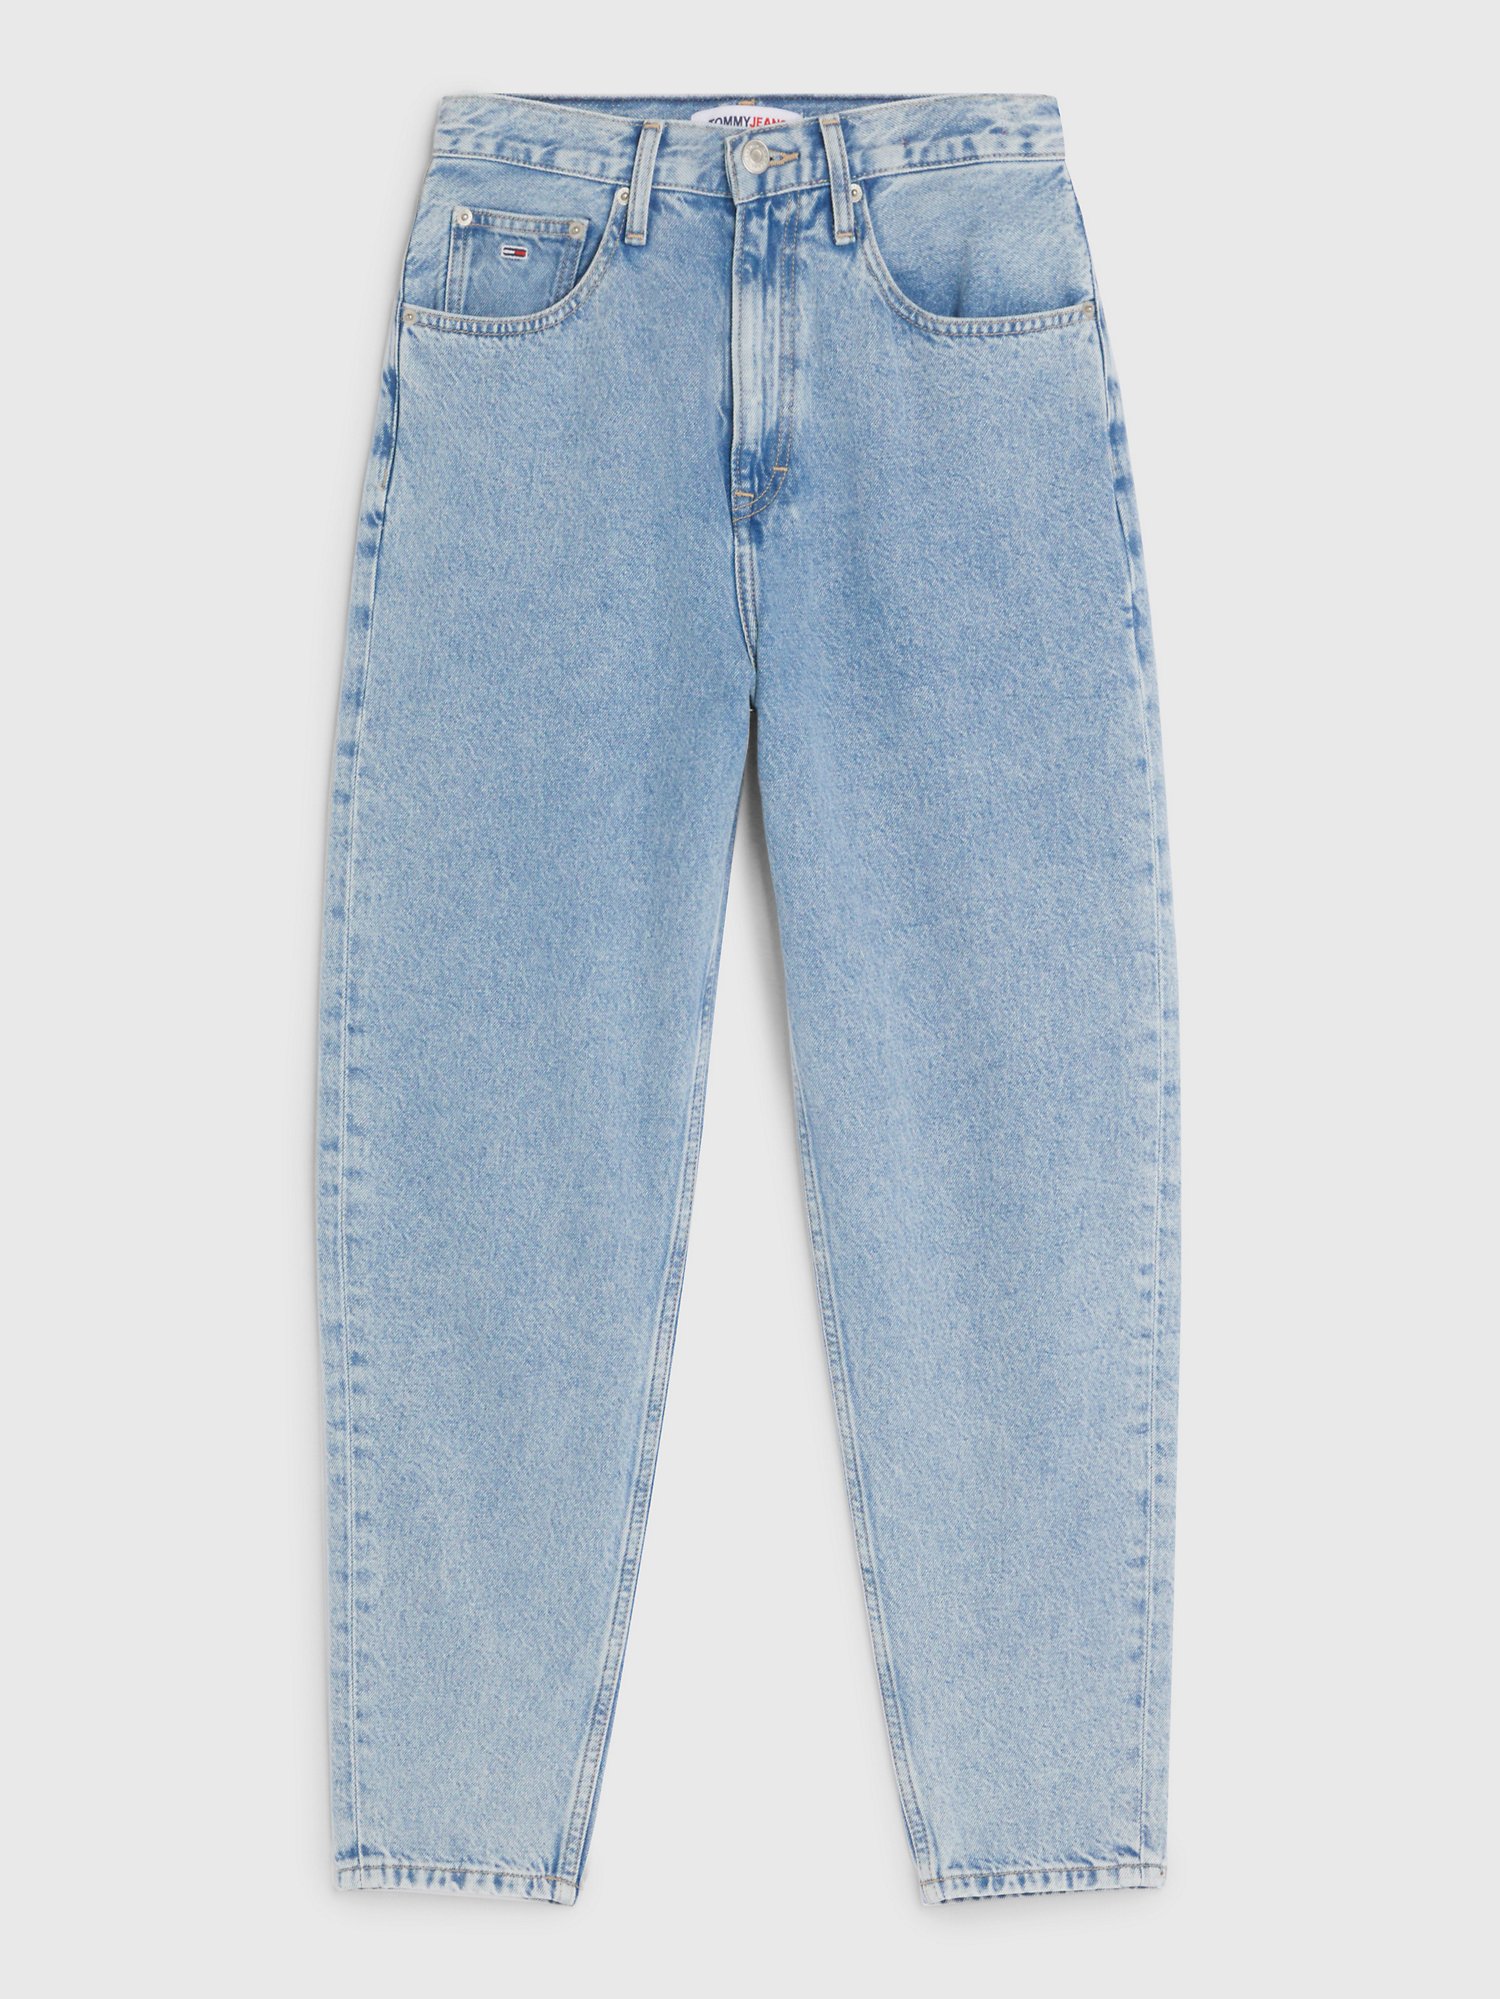 Resentimiento limpiar Berenjena High-Rise Tapered Fit Jean | Tommy Hilfiger